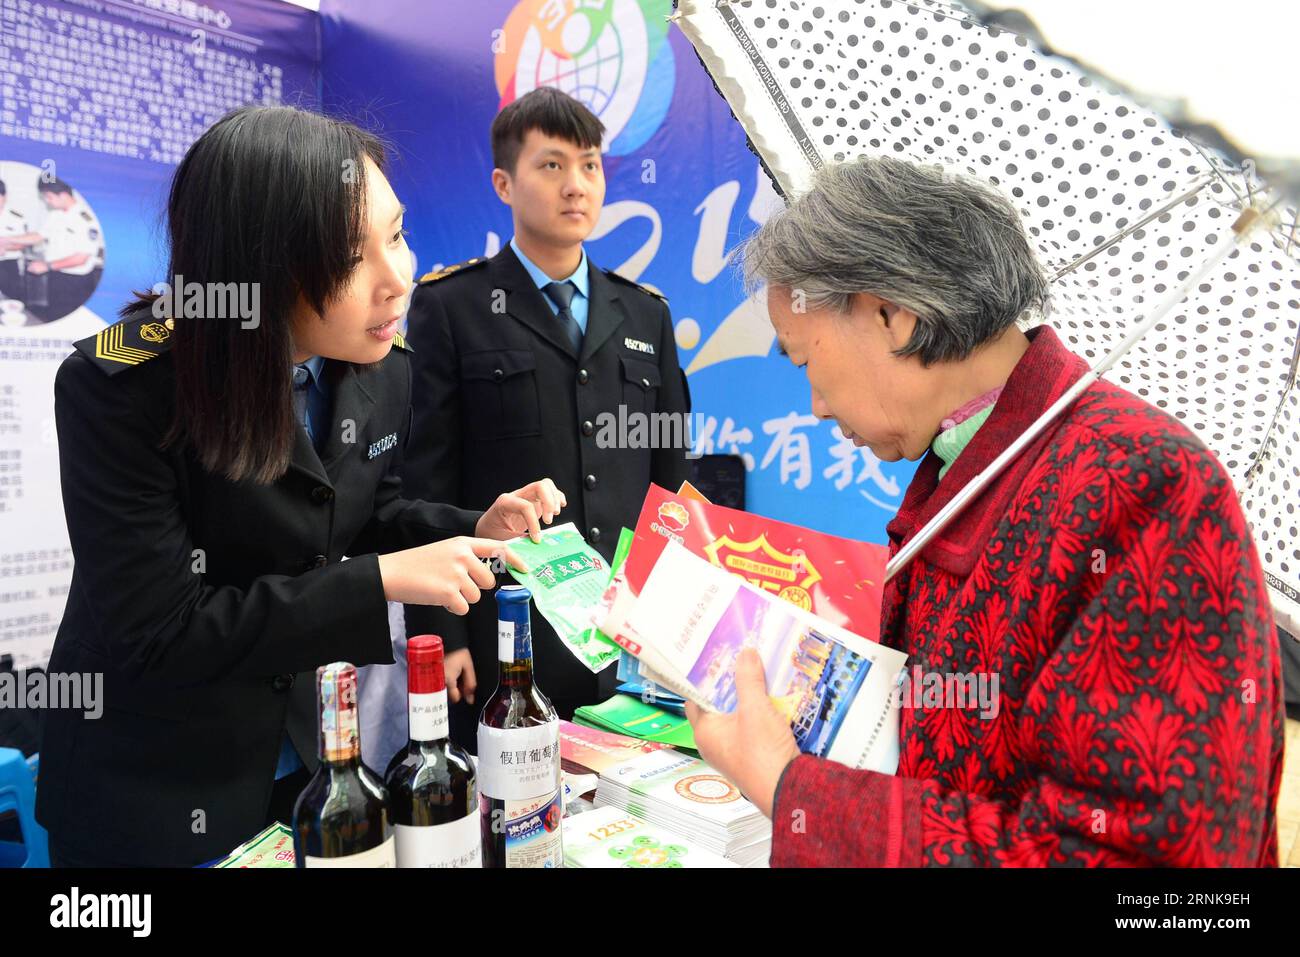 (170315) -- NANNING, March 15, 2017 -- A citizen is introduced ways of distinguishing bogus medicines in Nanning, capital of southwest China s Guangxi Zhuang Autonomous Region, March 15, 2017, the International Consumer Rights Day. Various activities were held across China to ensure the rights of consumers. ) (zwx) CHINA-CONSUMER RIGHTS DAY-ACTIVITIES (CN) RenxPengfei PUBLICATIONxNOTxINxCHN   Nanning March 15 2017 a Citizen IS introduced Ways of distinguishing Bogus Medicines in Nanning Capital of Southwest China S Guangxi Zhuang Autonomous Region March 15 2017 The International Consumer Right Stock Photo